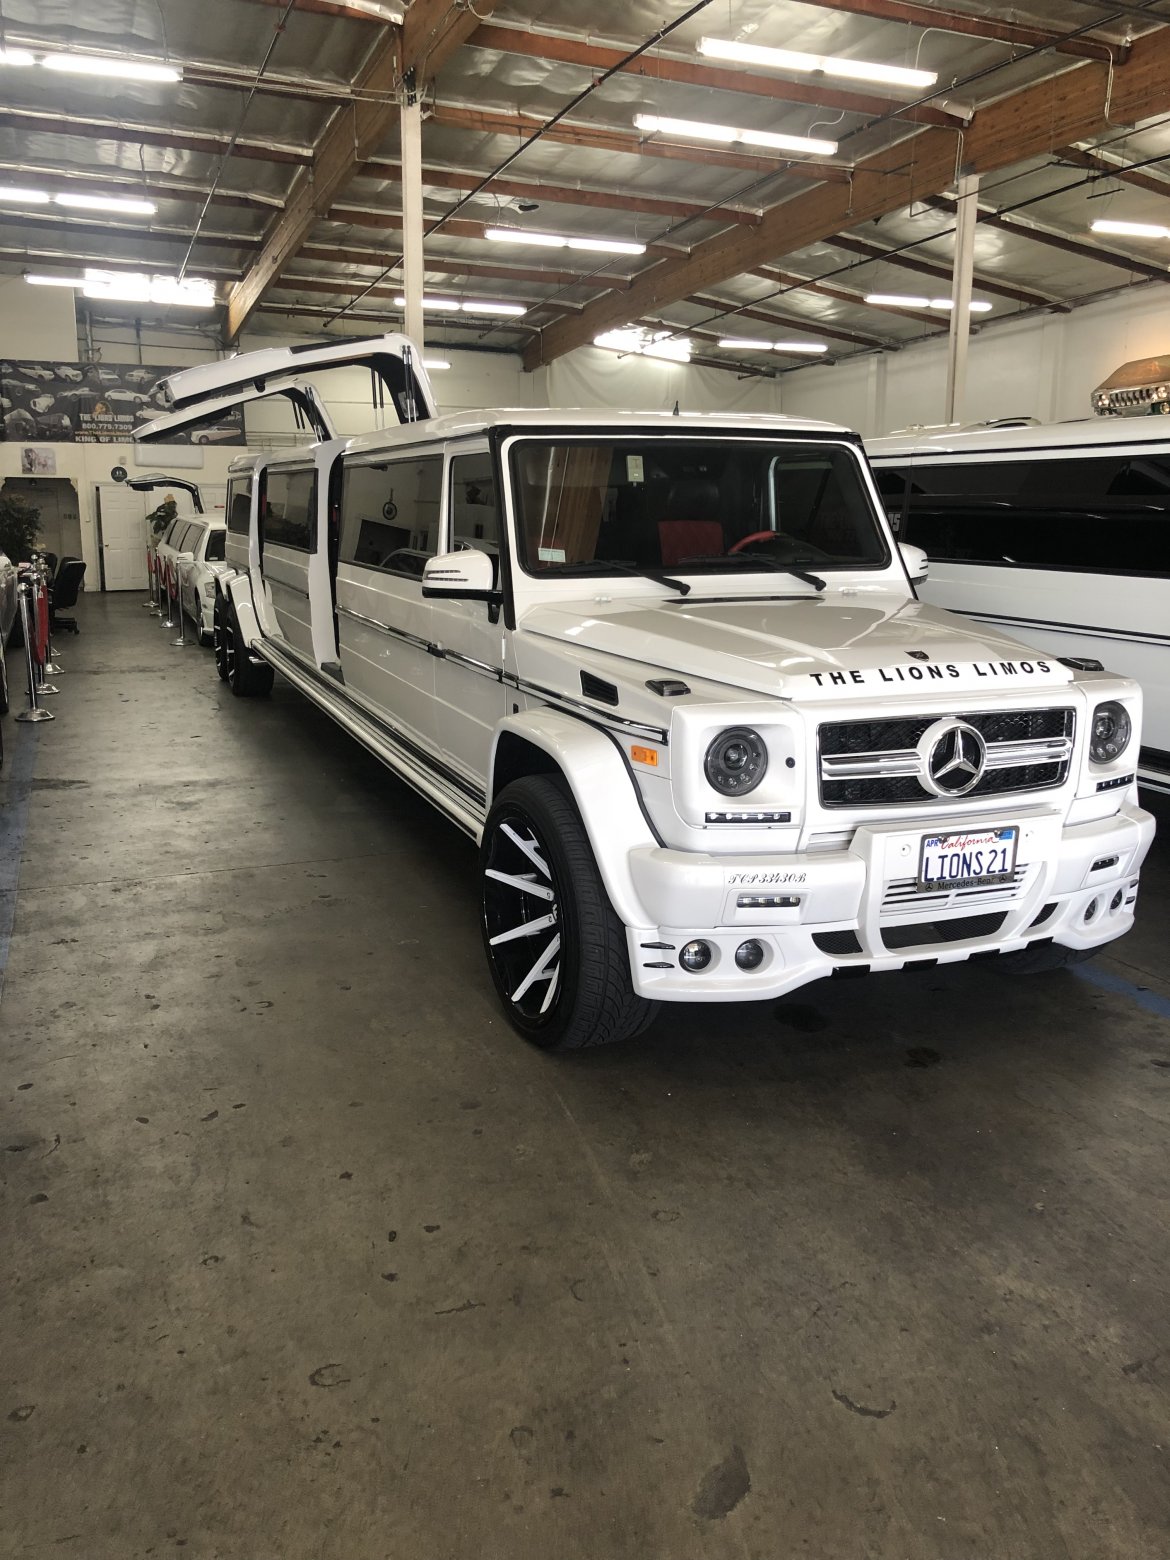 Used 2003 Mercedes Benz G Wagon For Sale Ws 13851 We Sell Limos